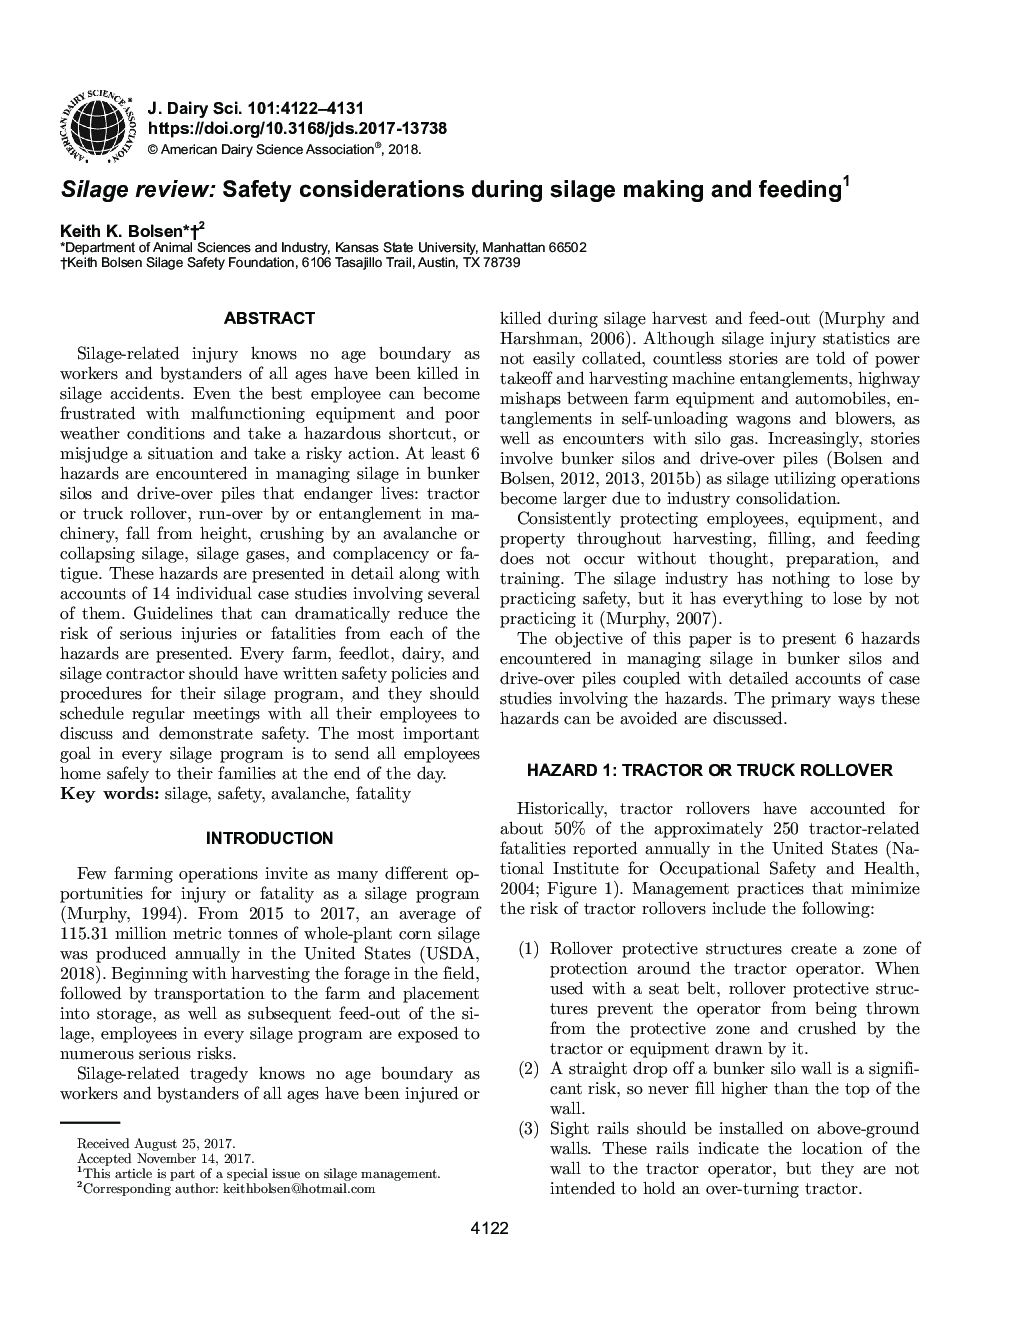 Silage review: Safety considerations during silage making and feeding